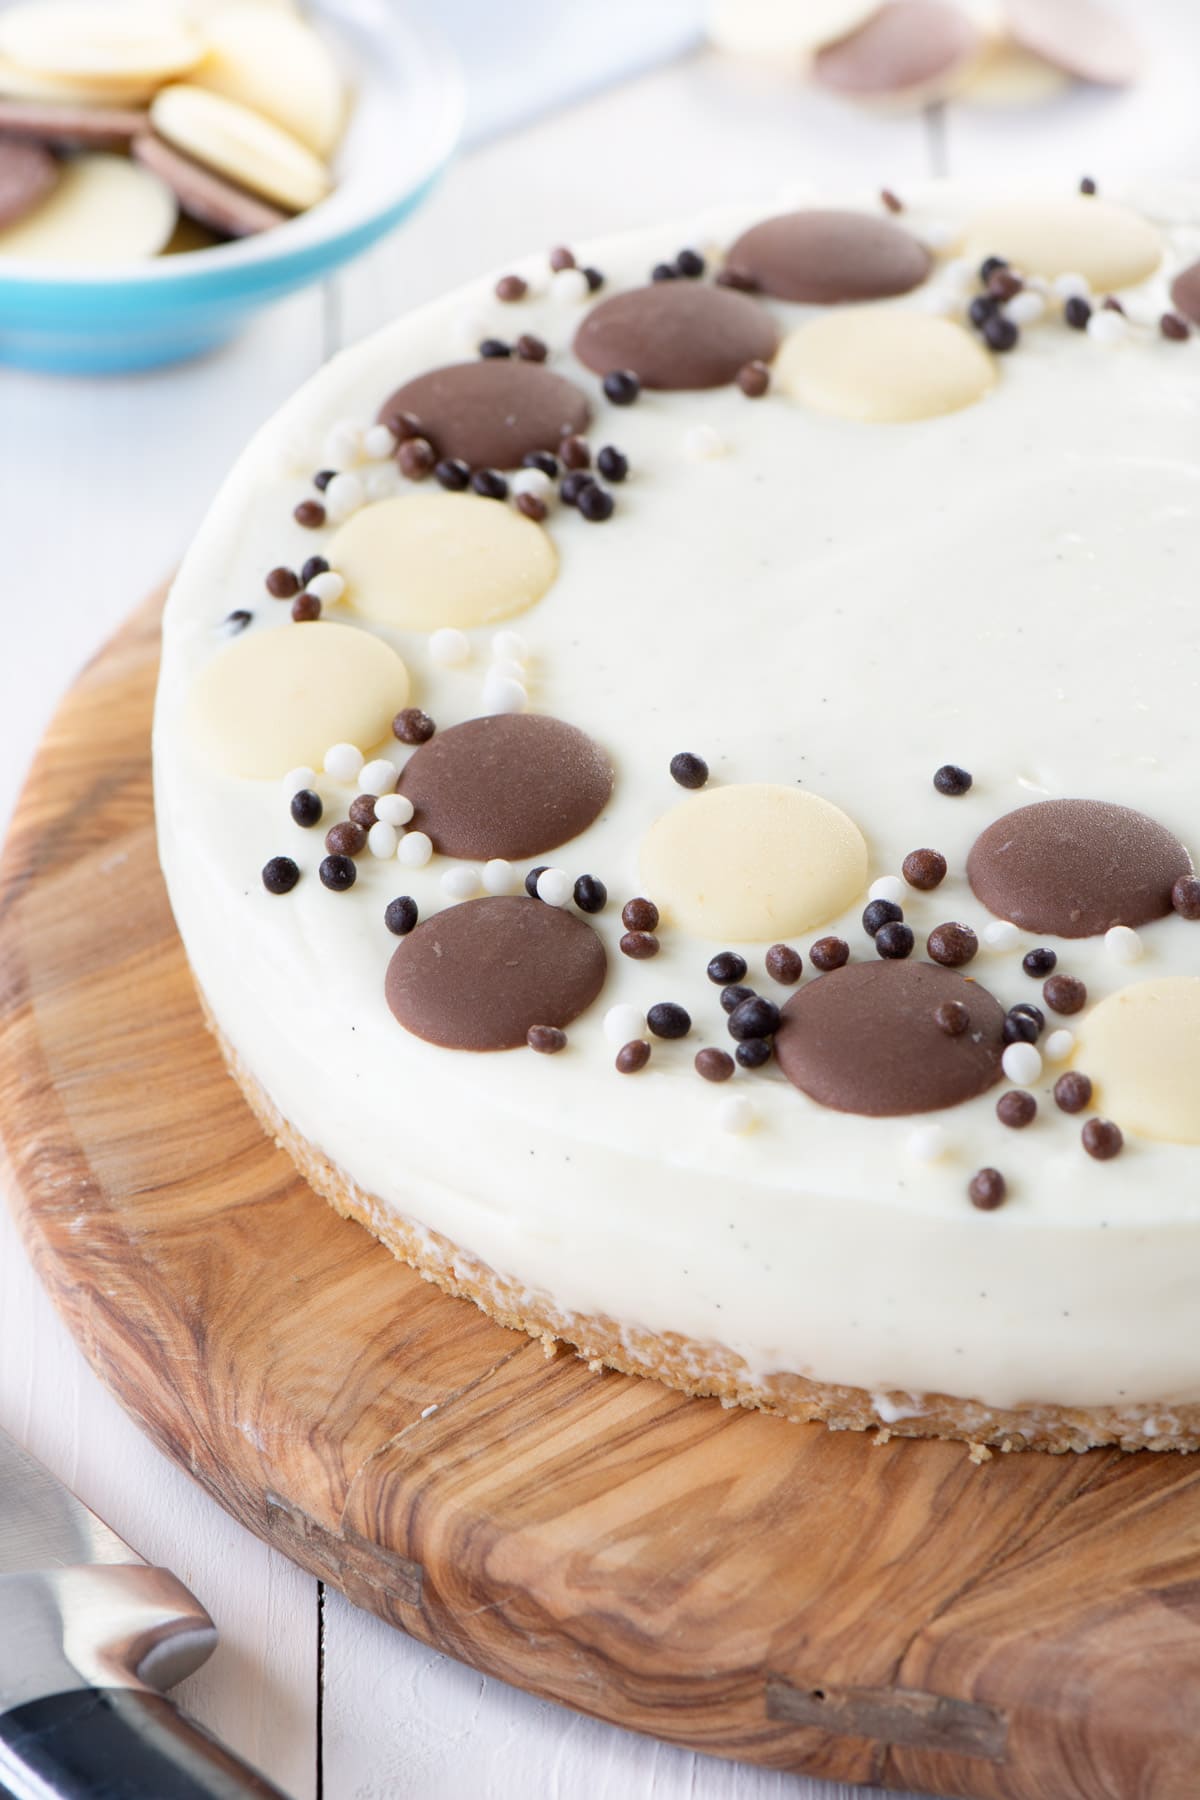 No-bake white chocolate cheesecake on a wooden board. The cheesecake is decorated with white and milk chocolate buttons and chocolate sprinkles.